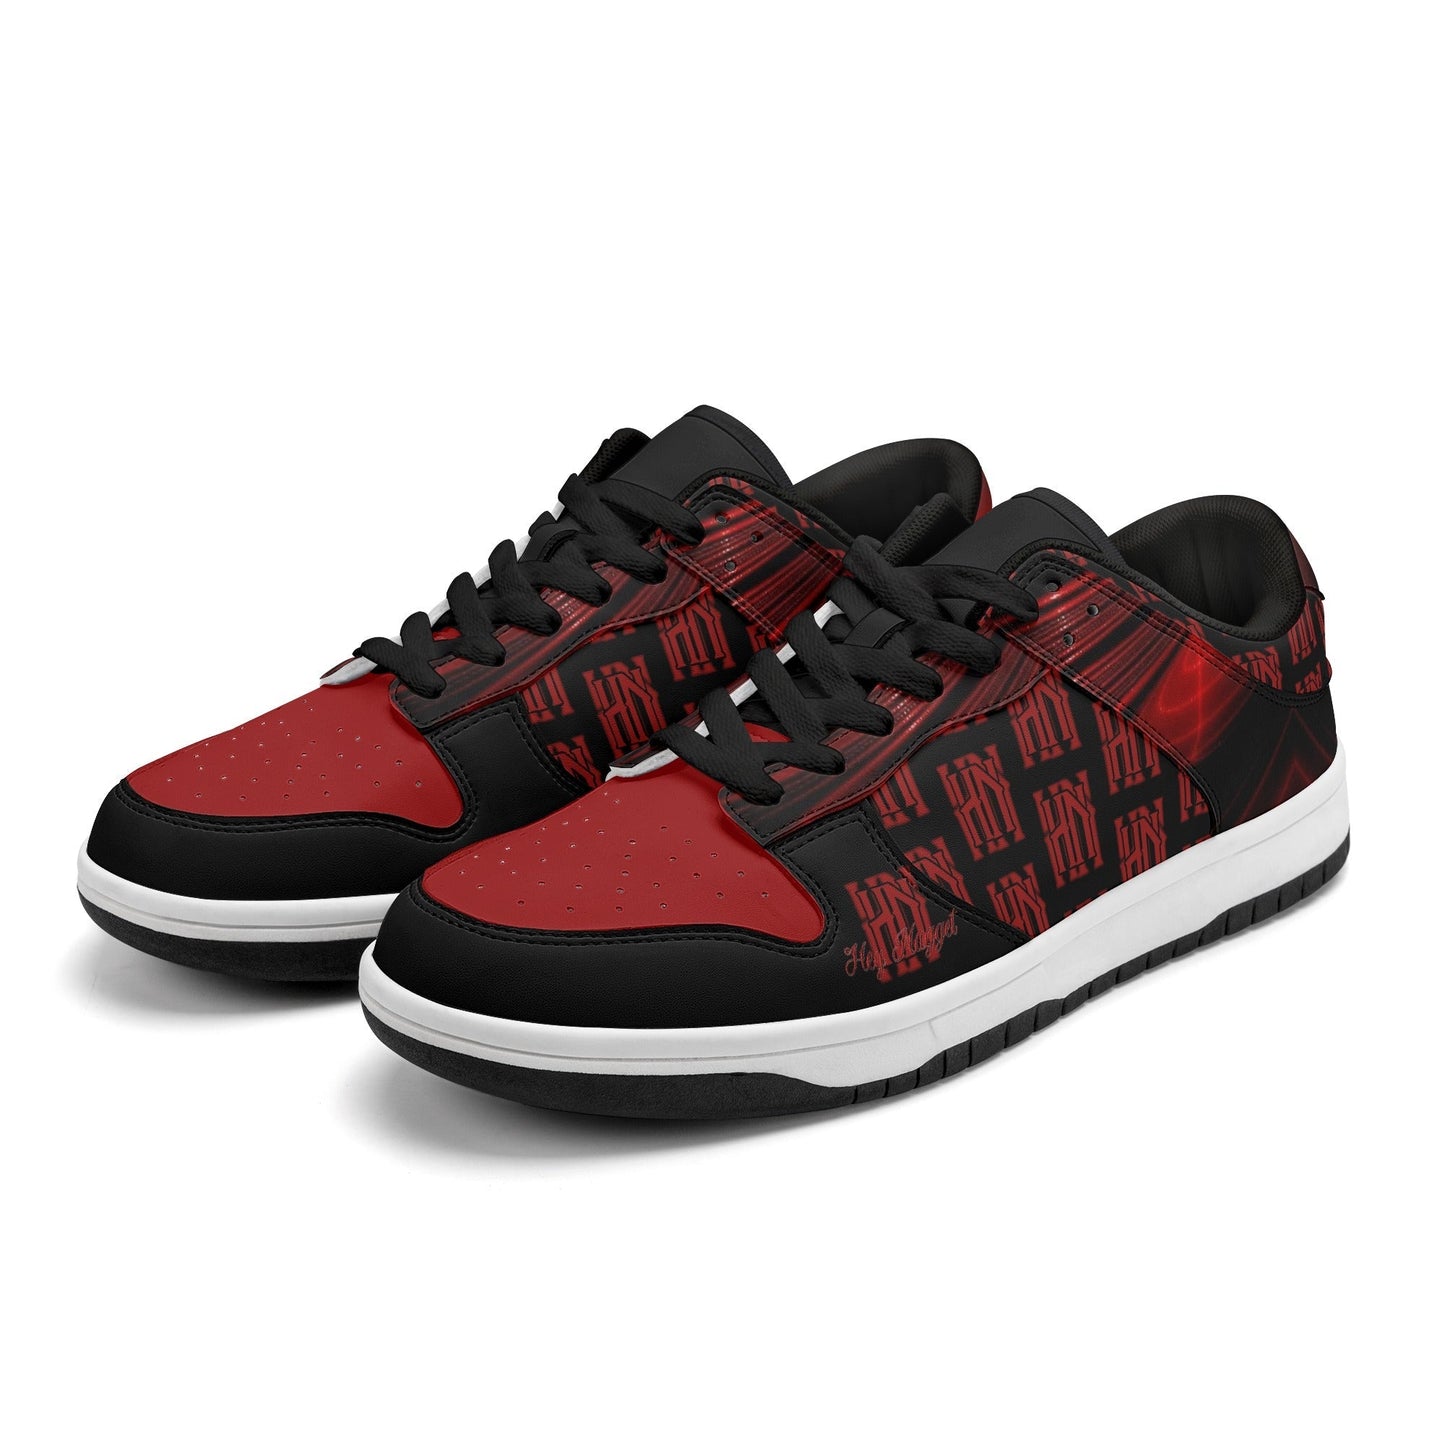 Stand out  with the  HN Mens Low Top Leather Sneakers  available at Hey Nugget. Grab yours today!